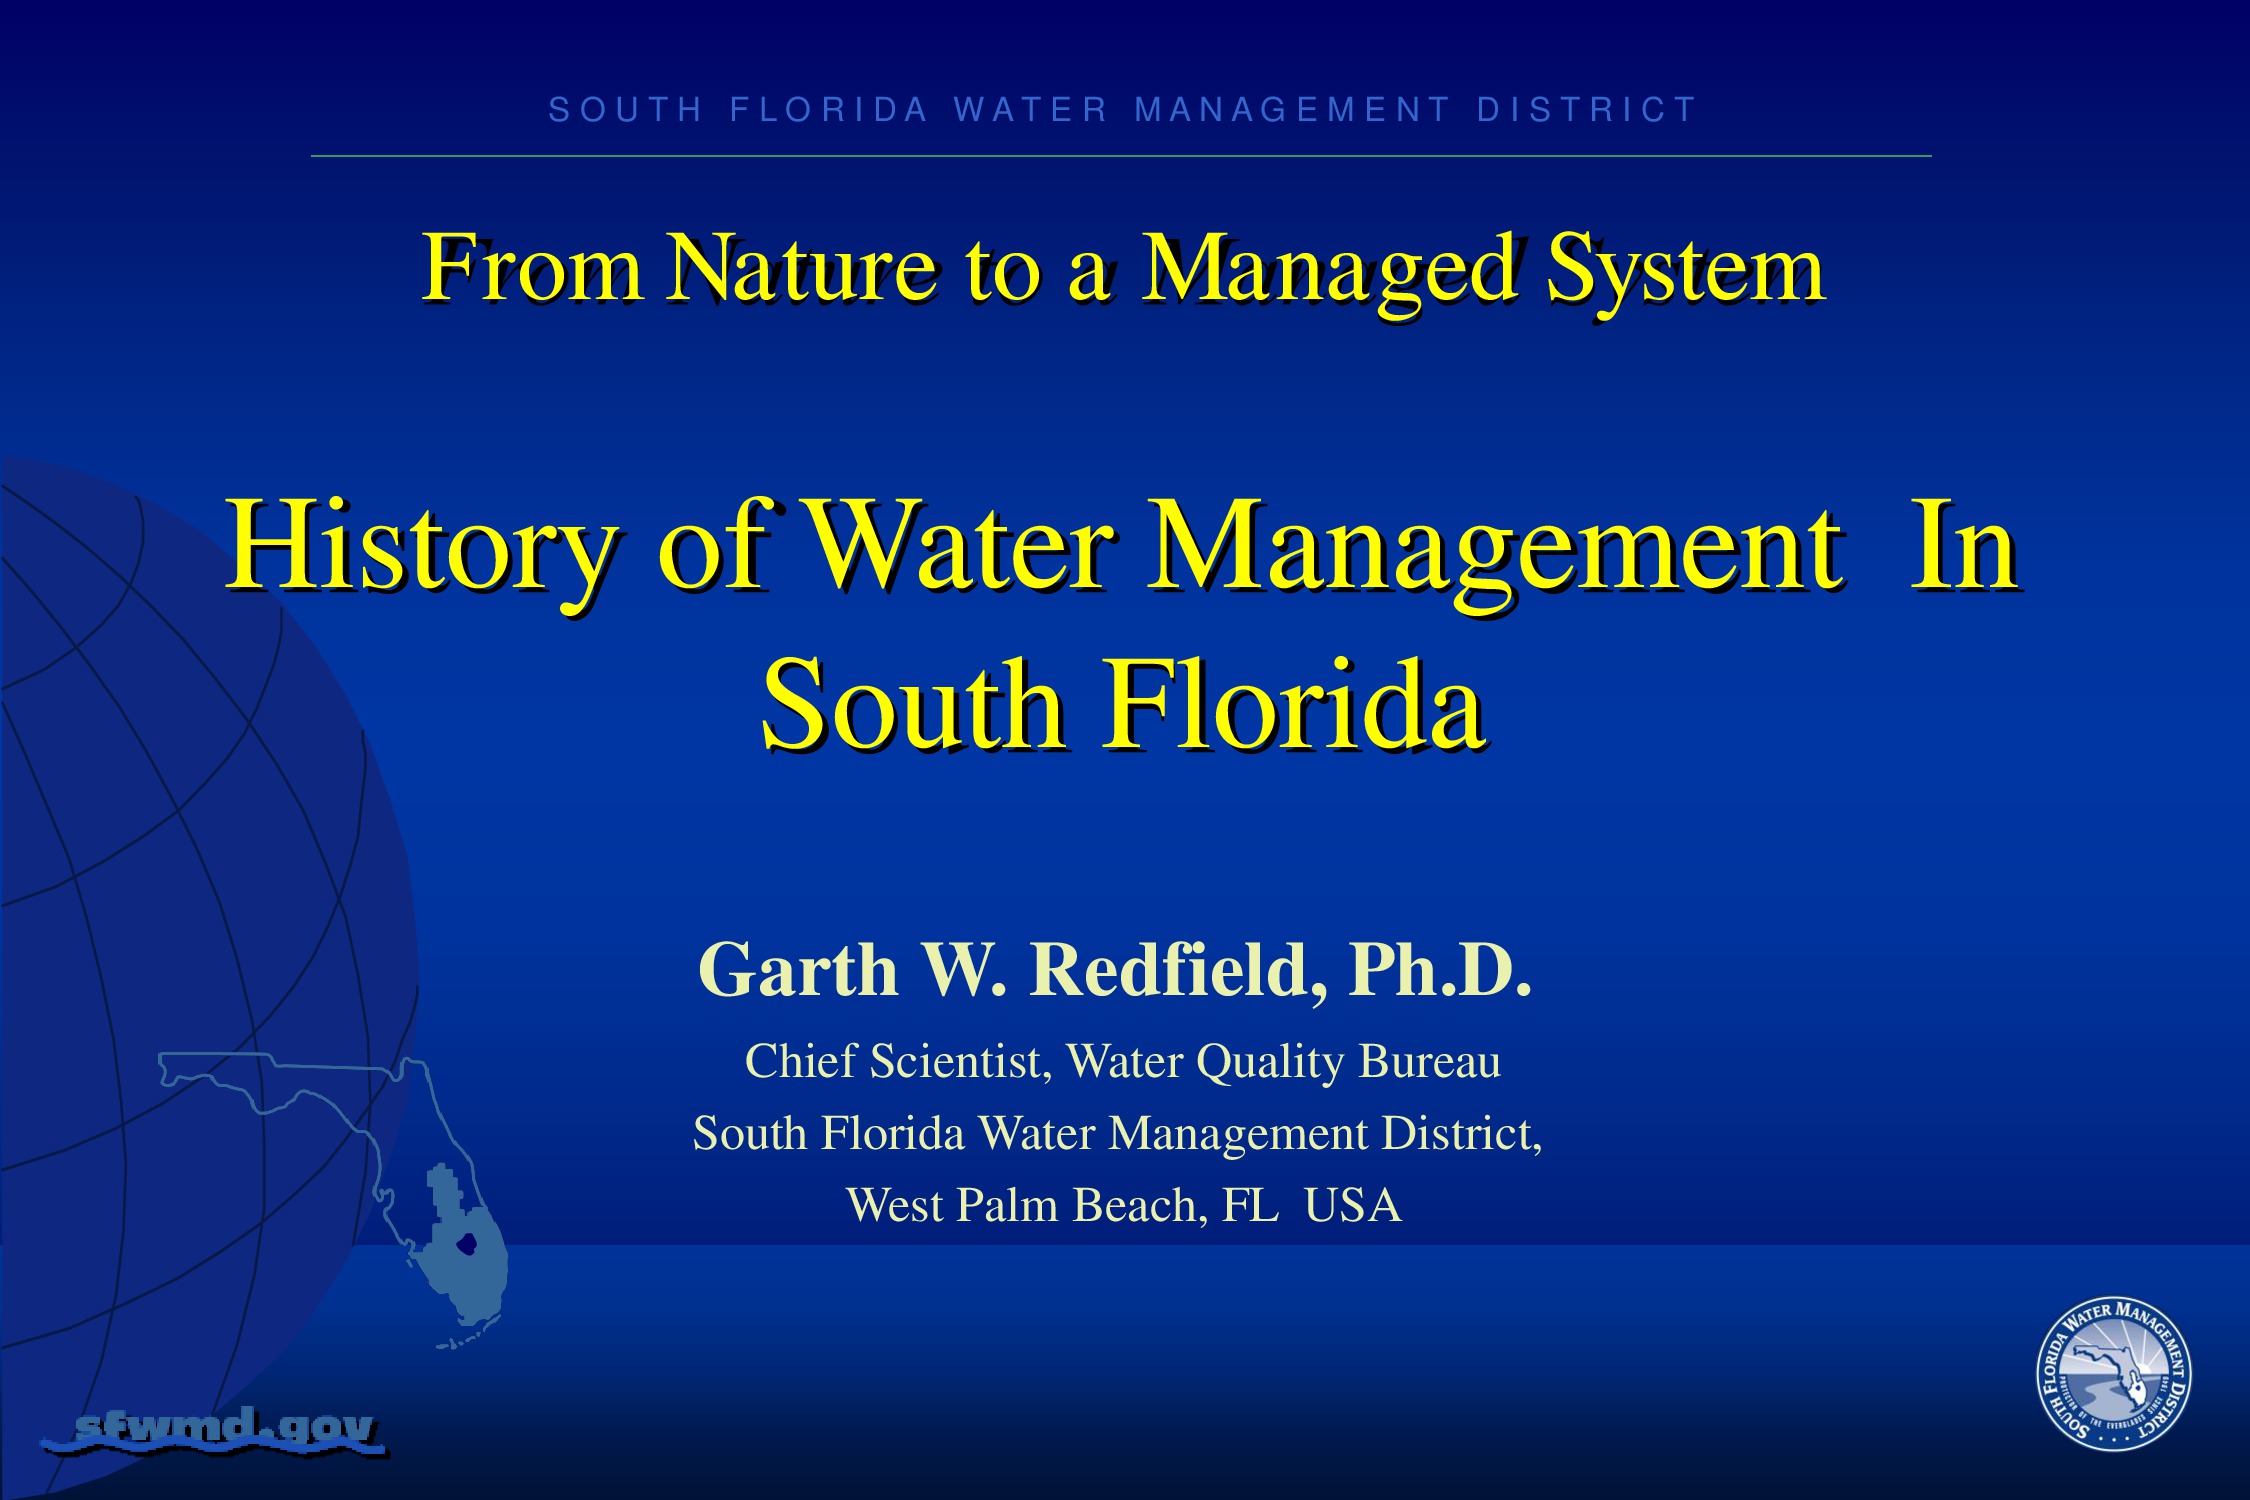 Lecture 1.2 History of Water Management